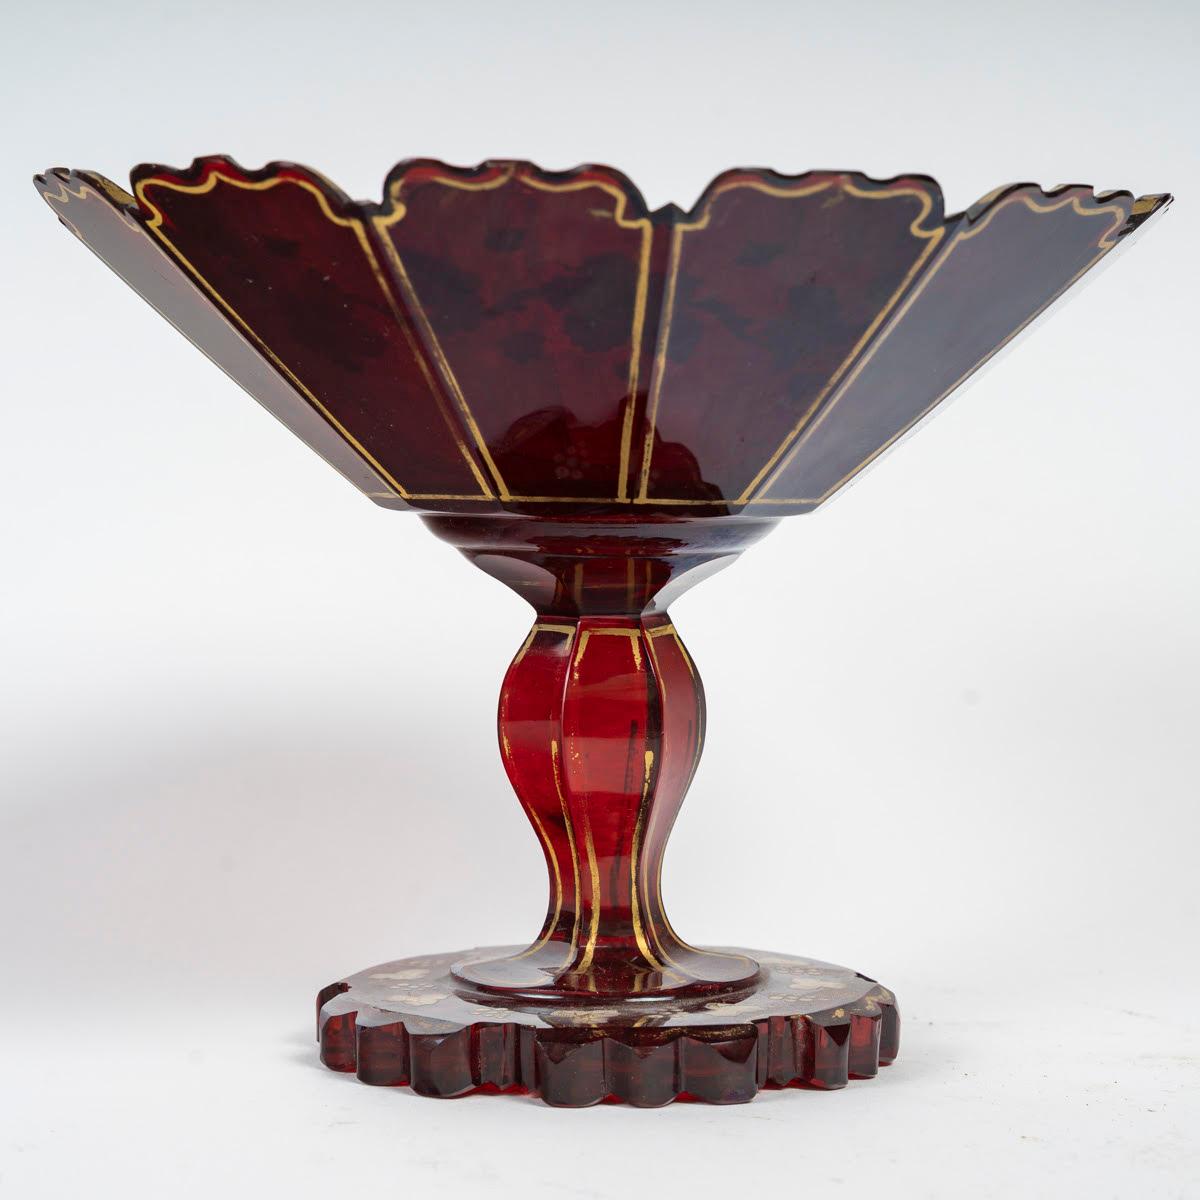 Enameled Bohemian Red Enamelled Crystal Bowl, 19th Century, Napoleon III Period. For Sale